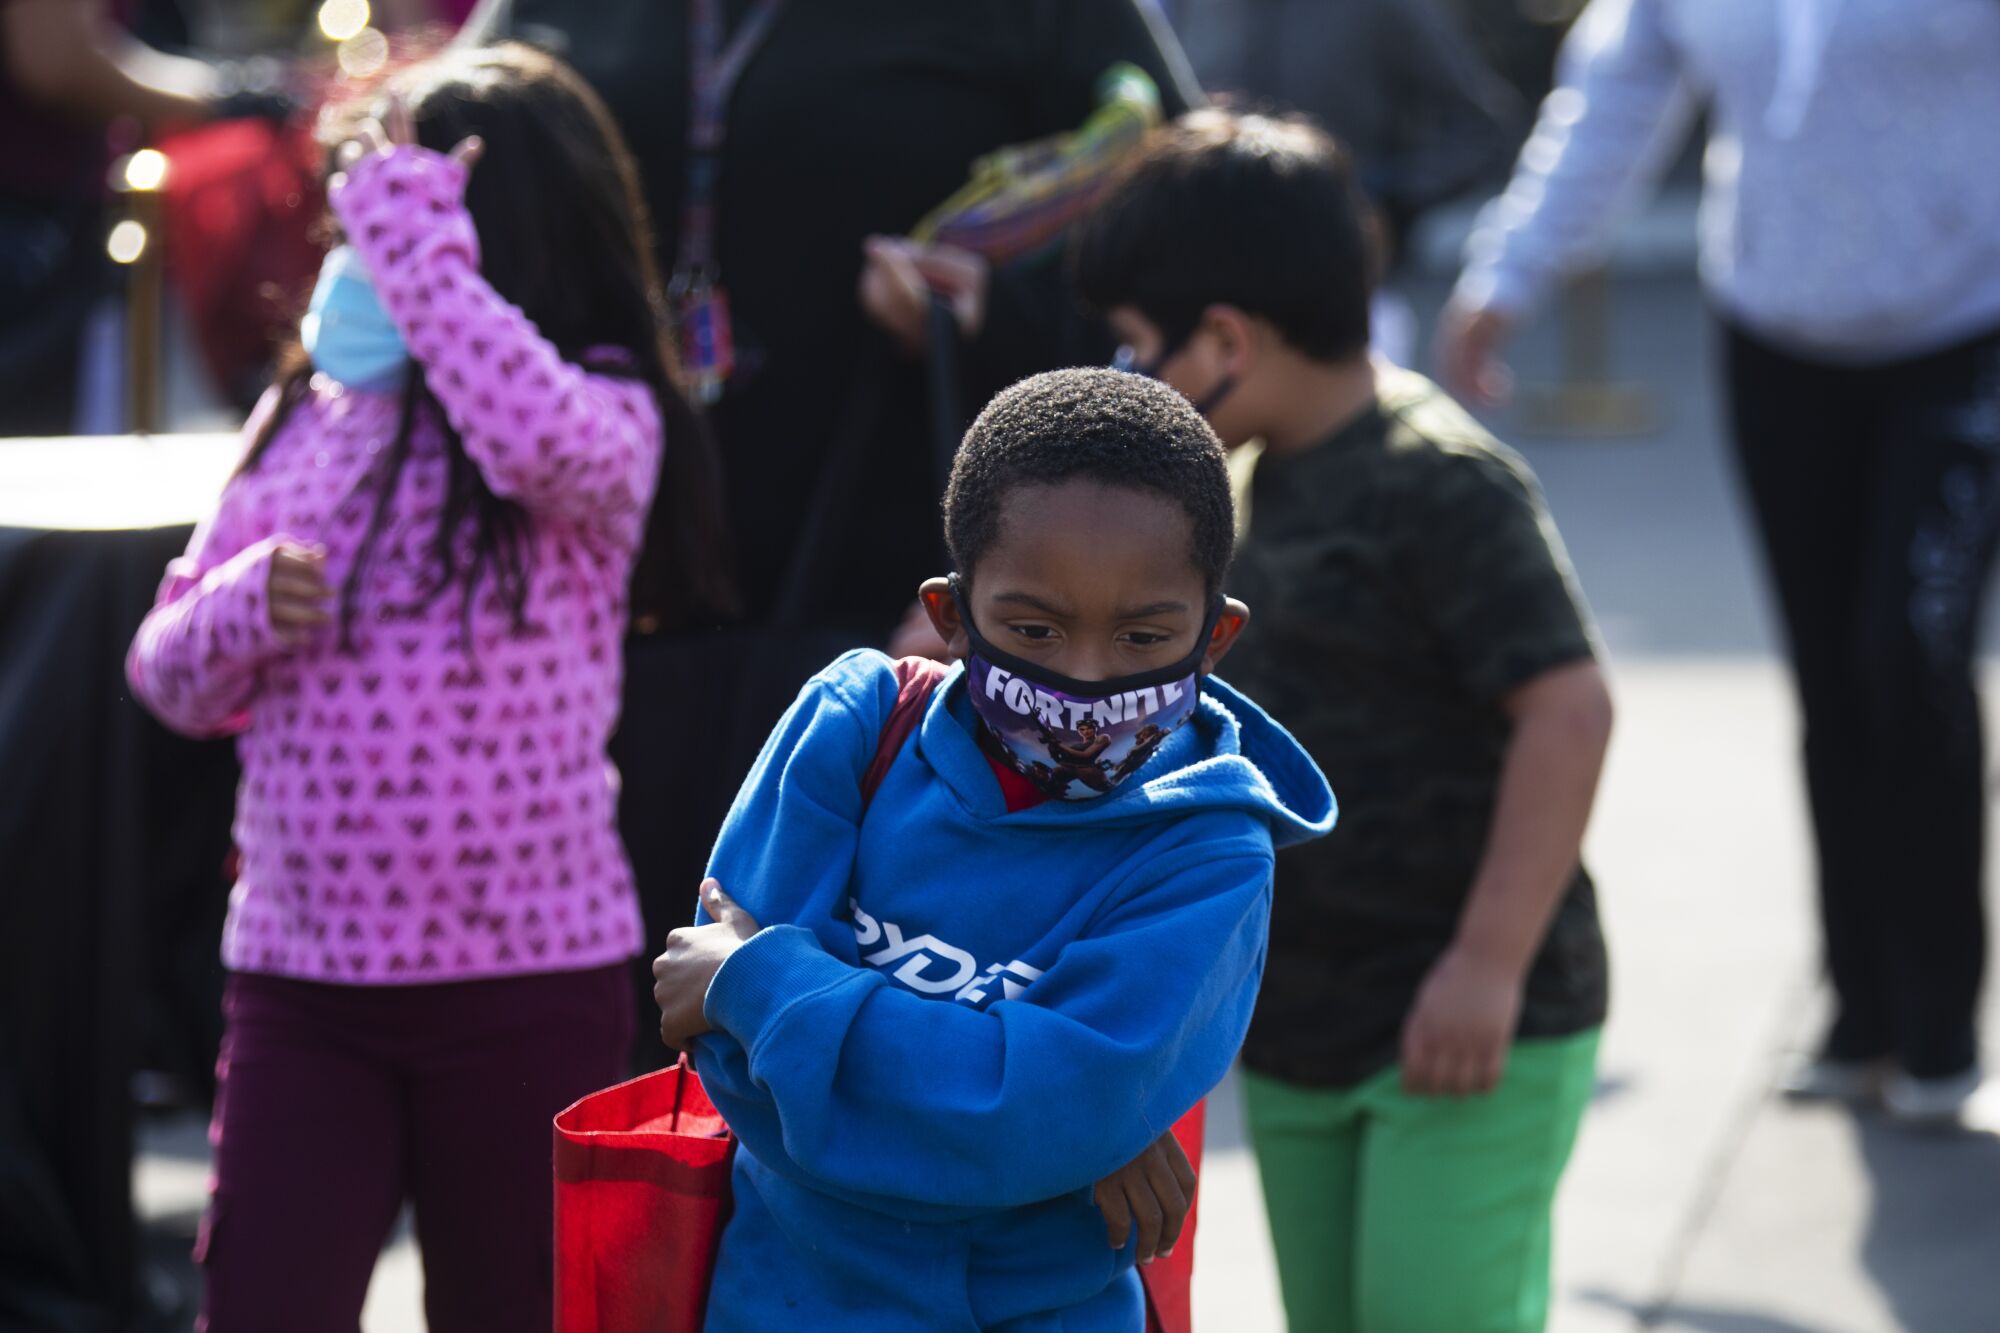 A little boy in a blue sweatshirt and Fortnite masks crosses his arms with a red tote bag over his shoulder